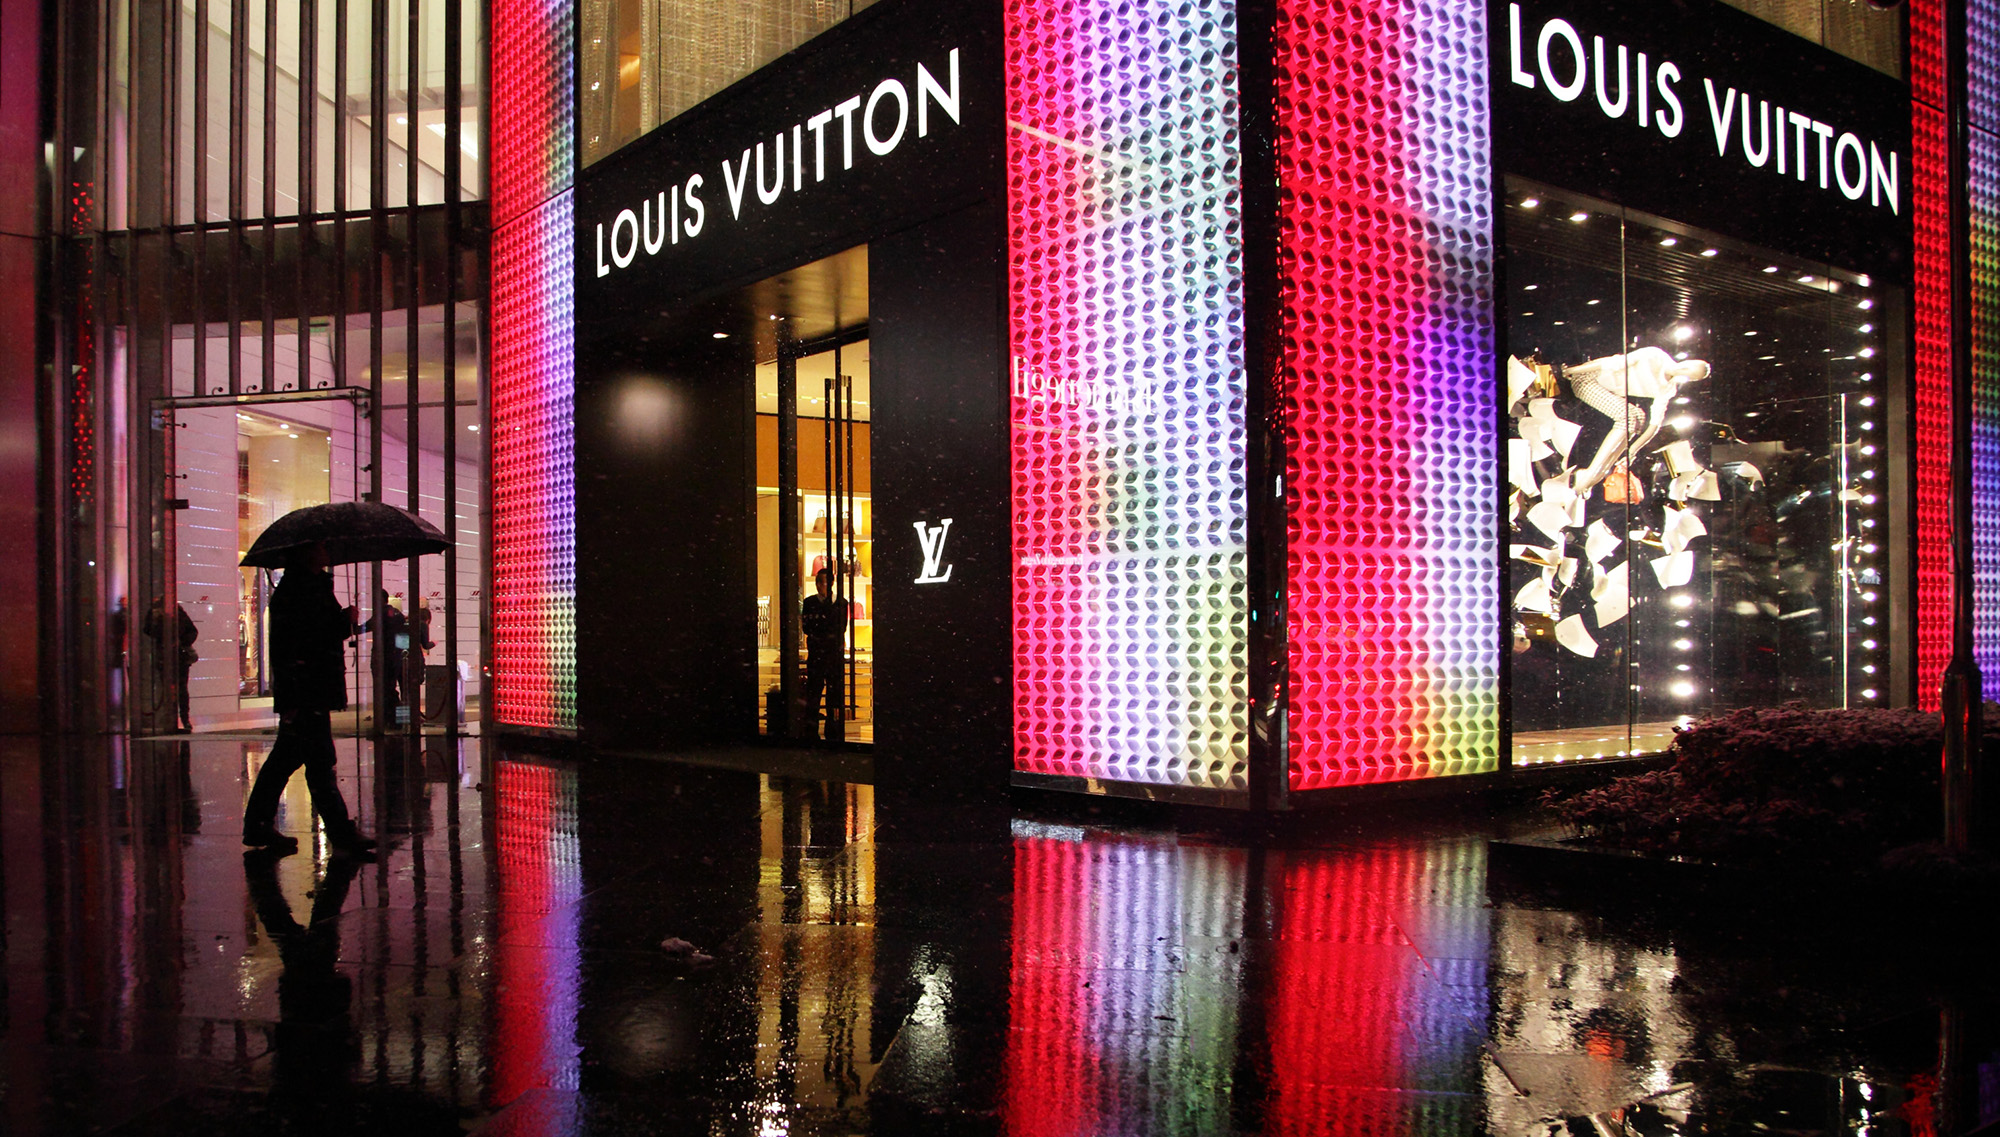 The Louis Vuitton store in the capital is about to get bigger